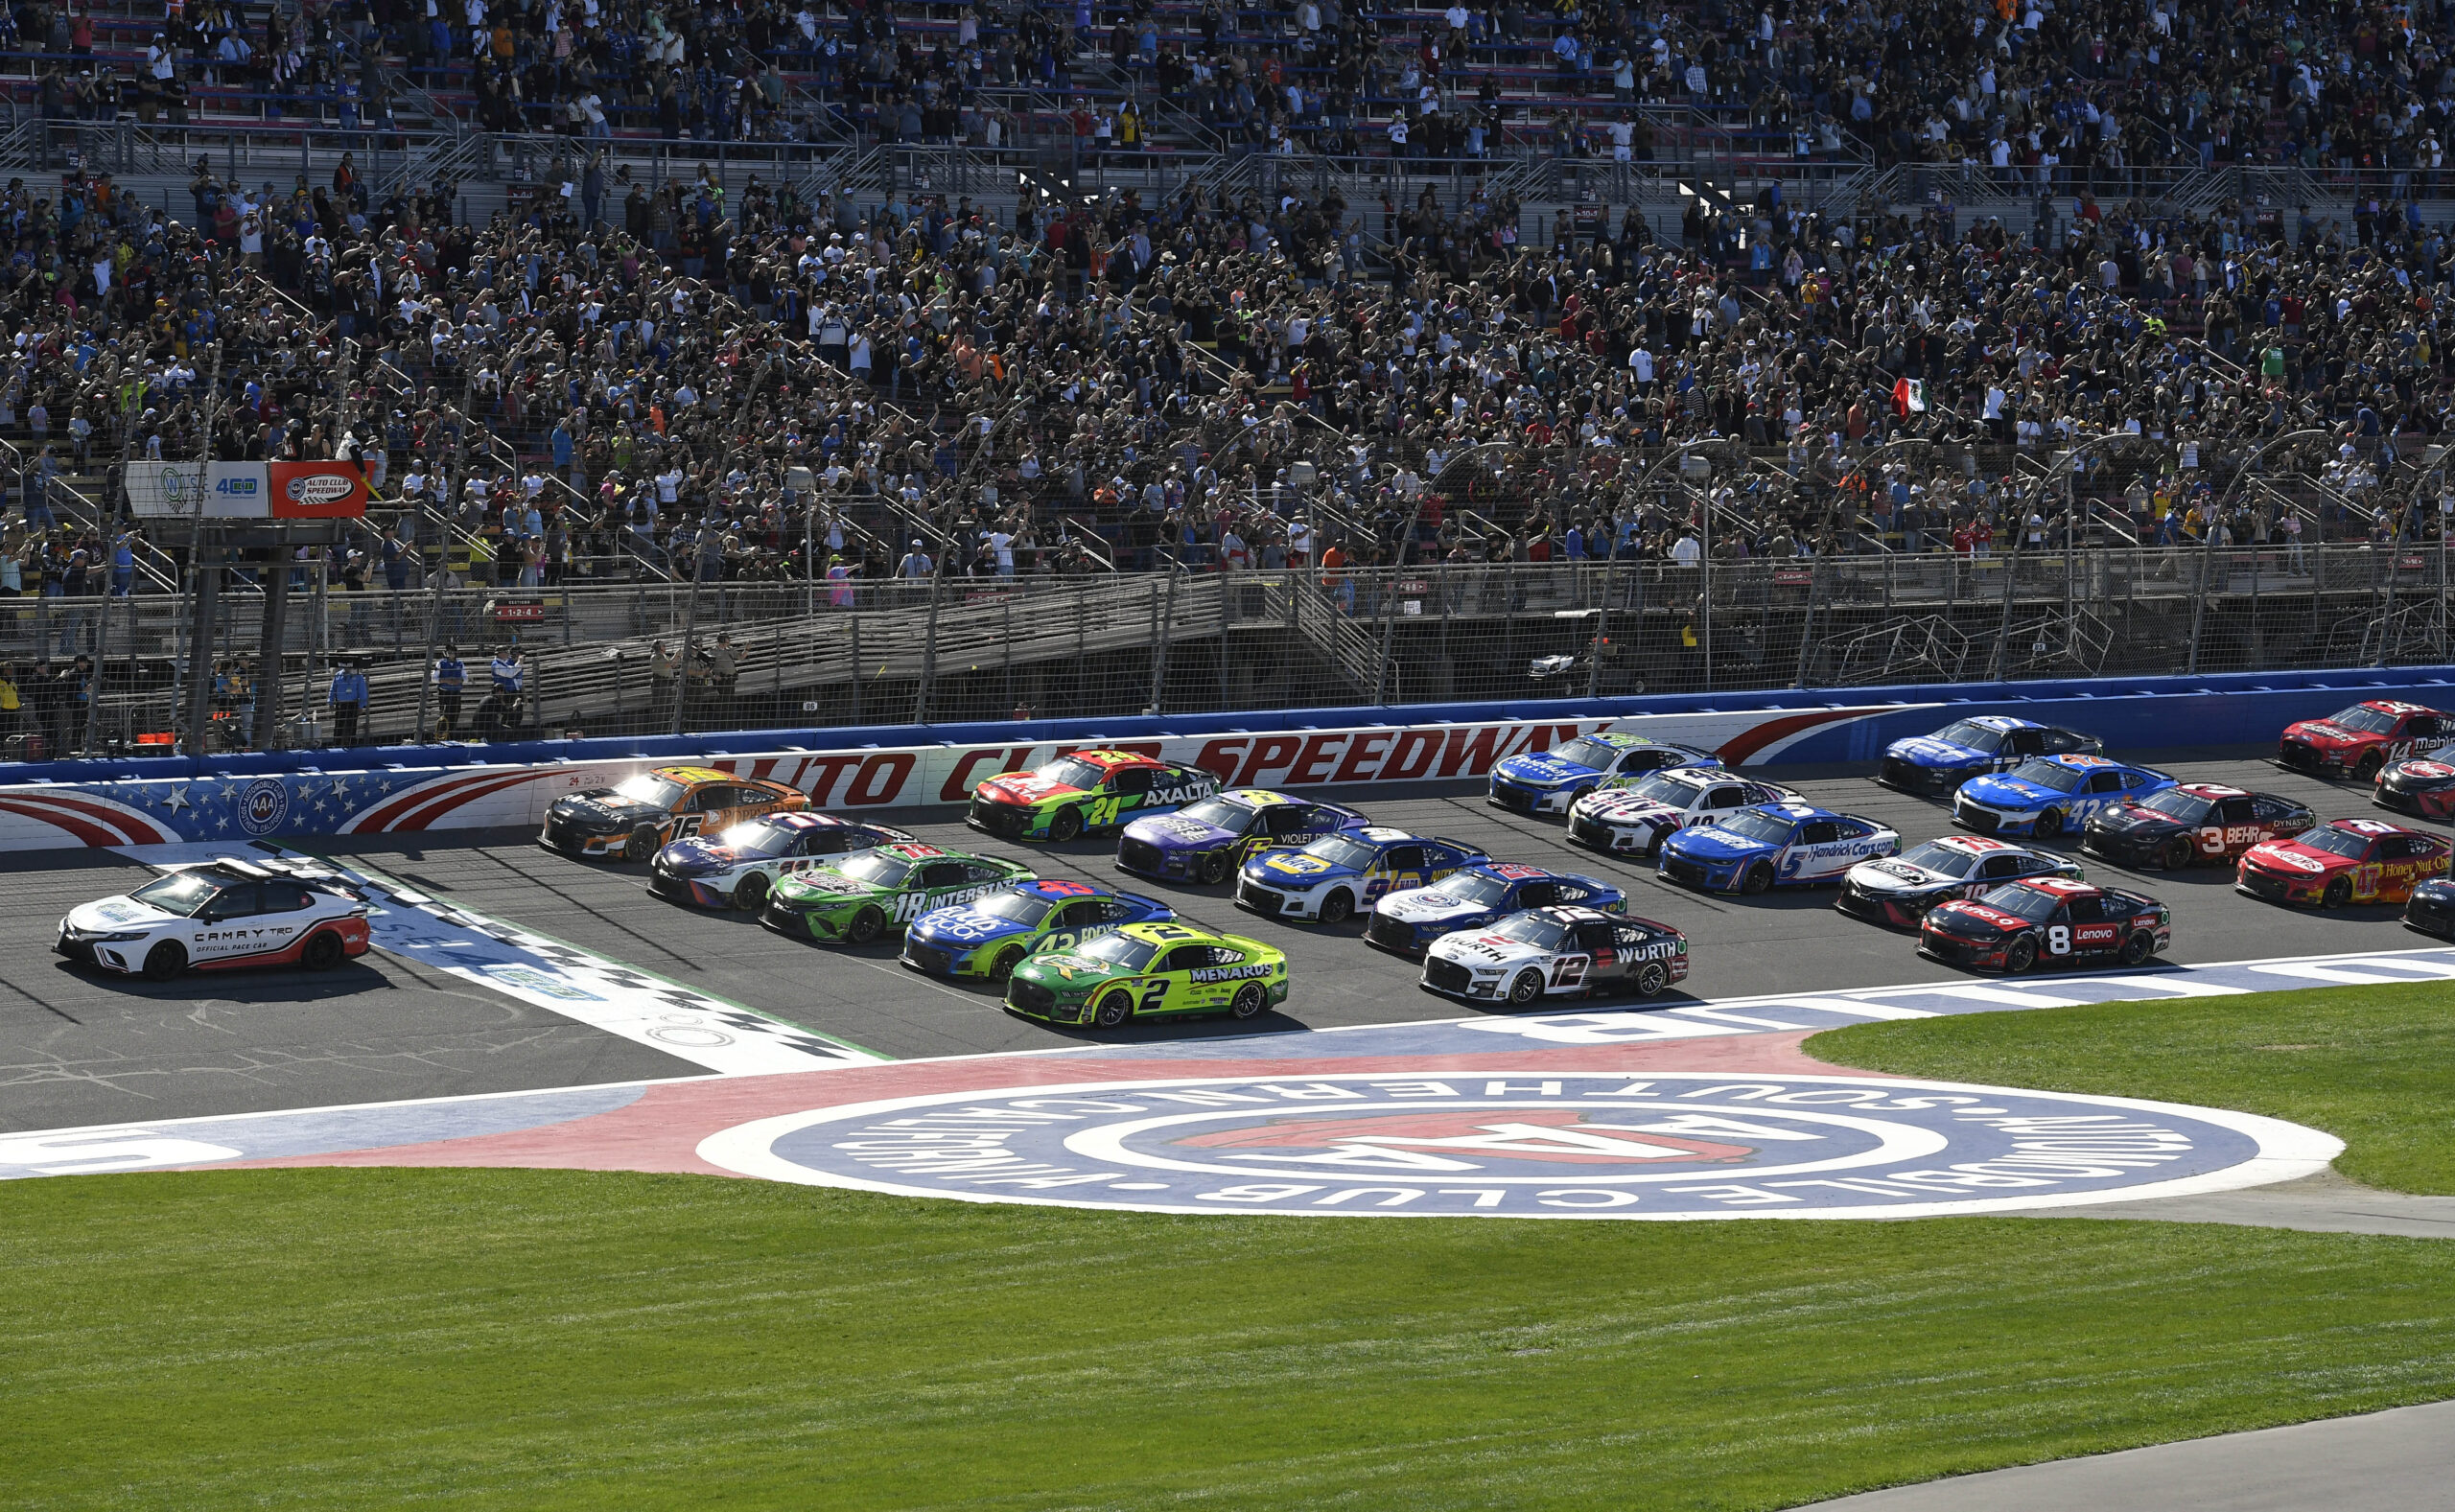 Who Can Win Two-Mile Auto Club Speedway's Last Race?